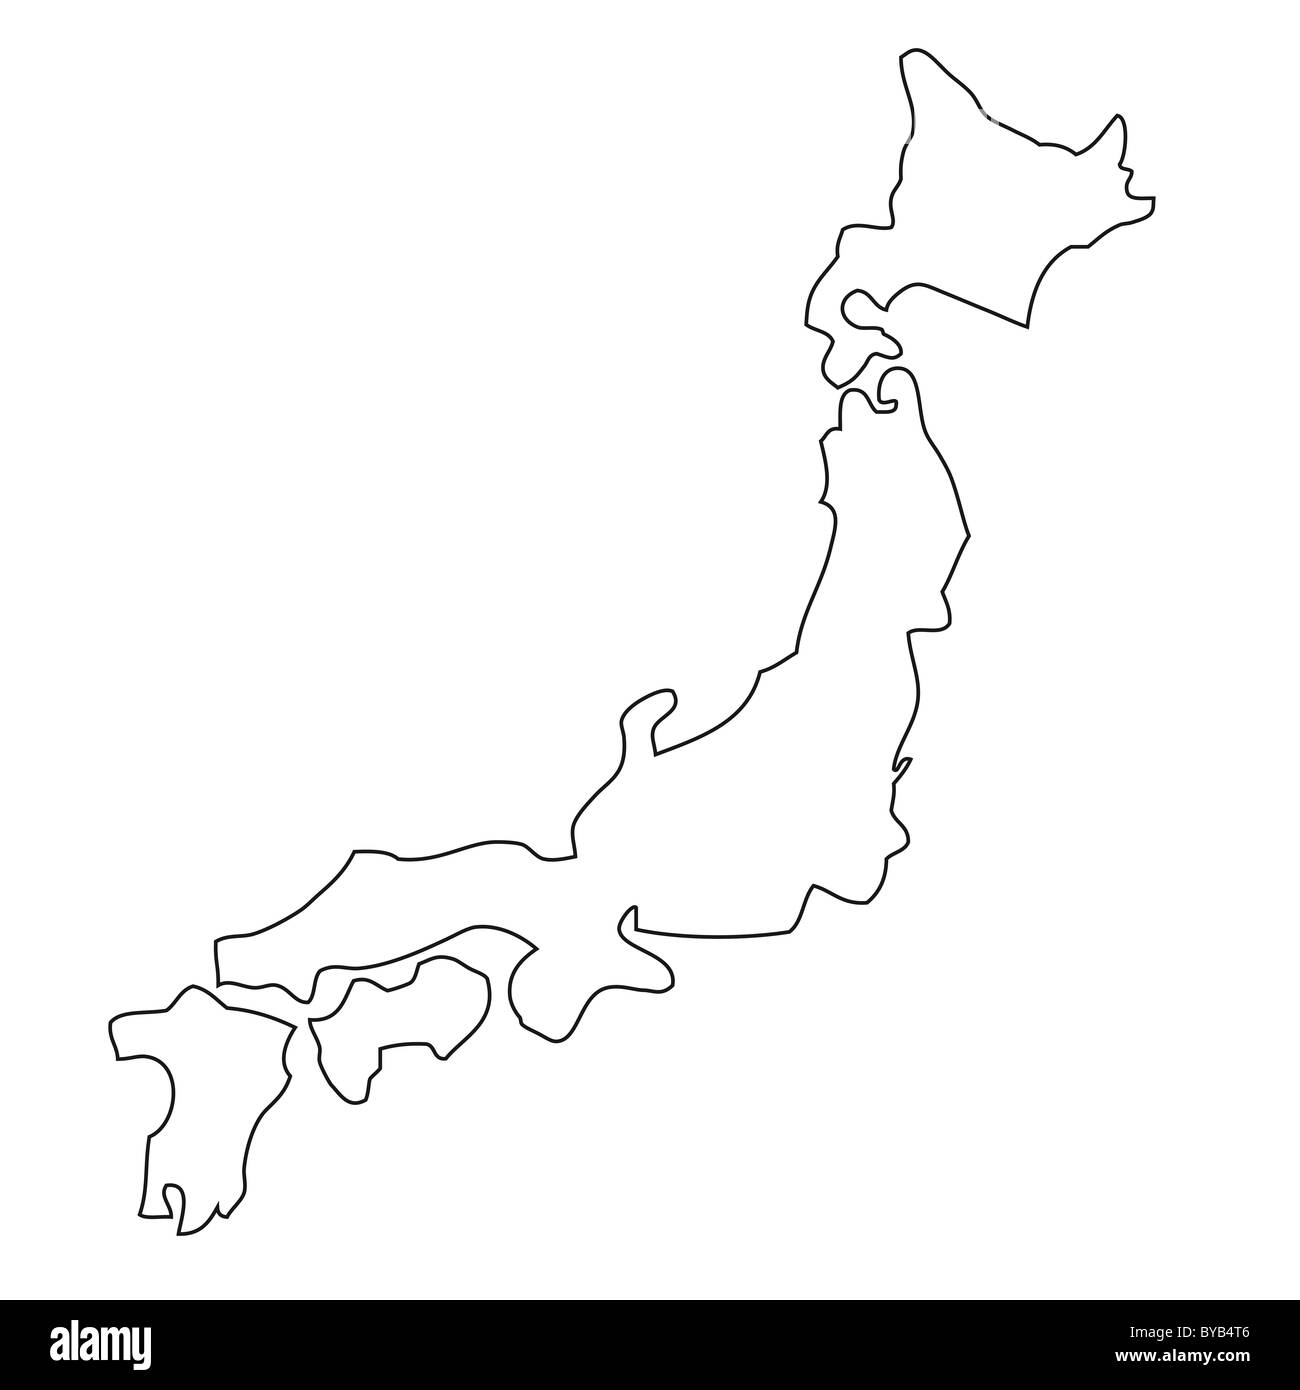 Outline, map of Japan Stock Photo